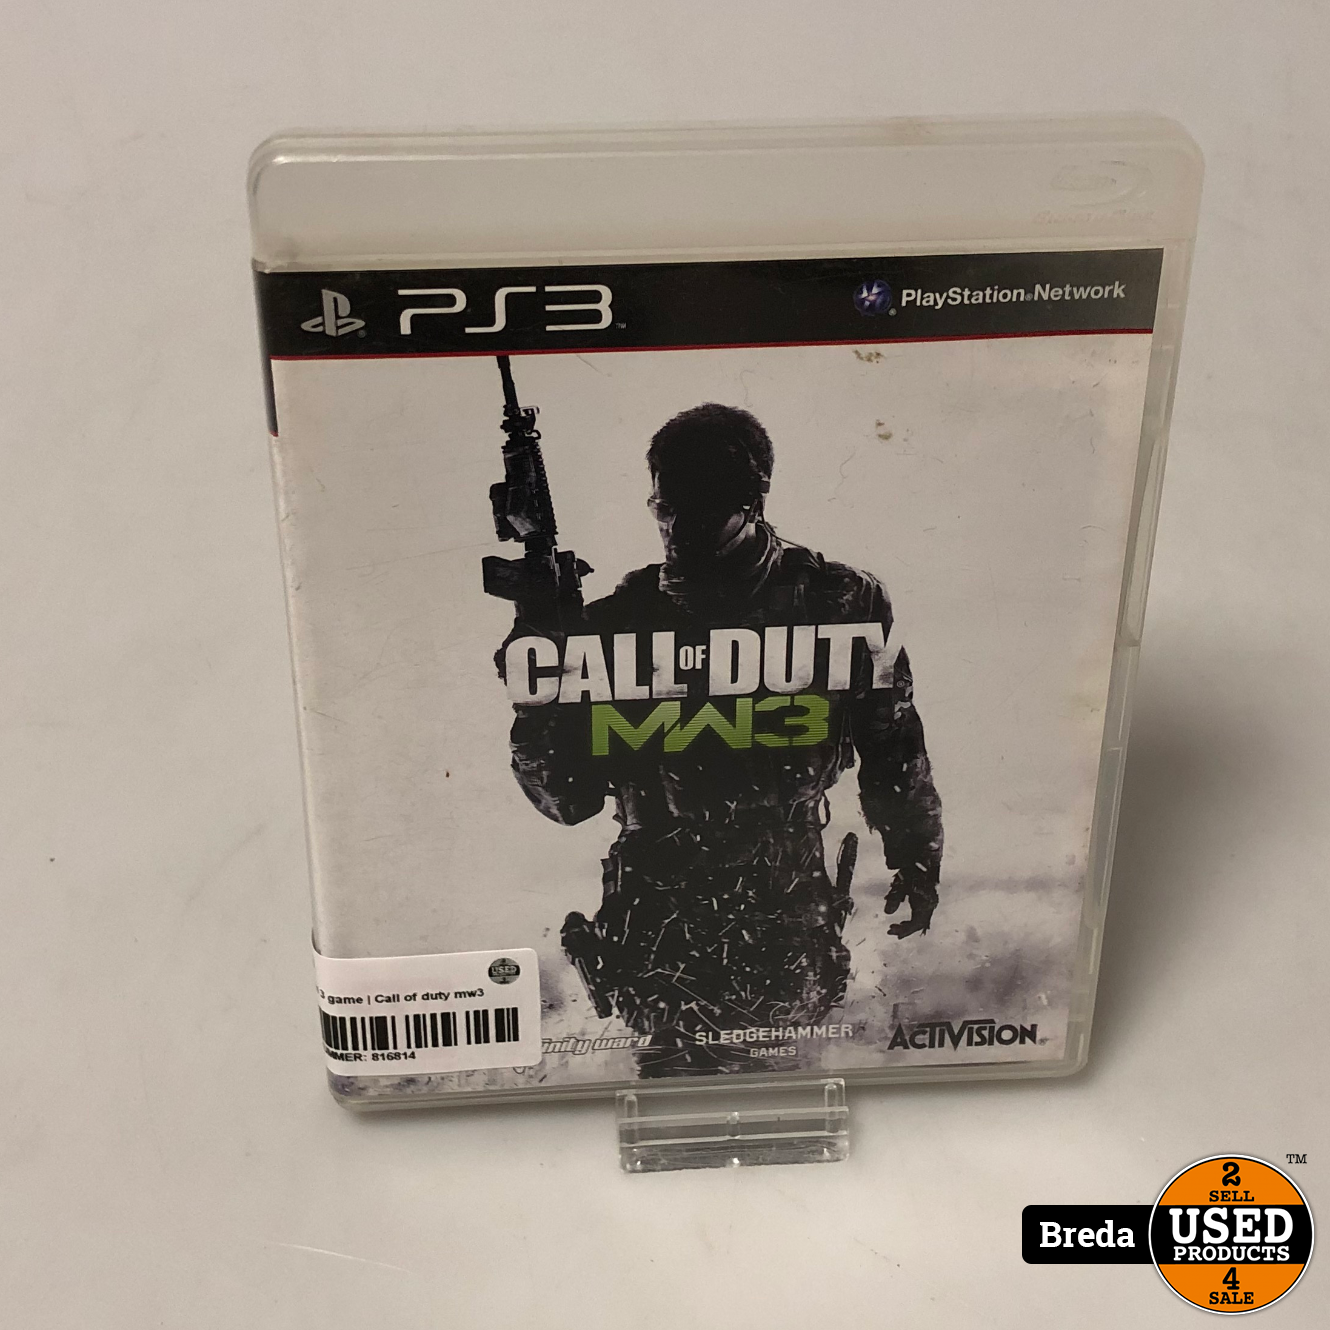 bout Doe alles met mijn kracht Absoluut Playstation 3 spel | Call of duty mw3 - Used Products Breda